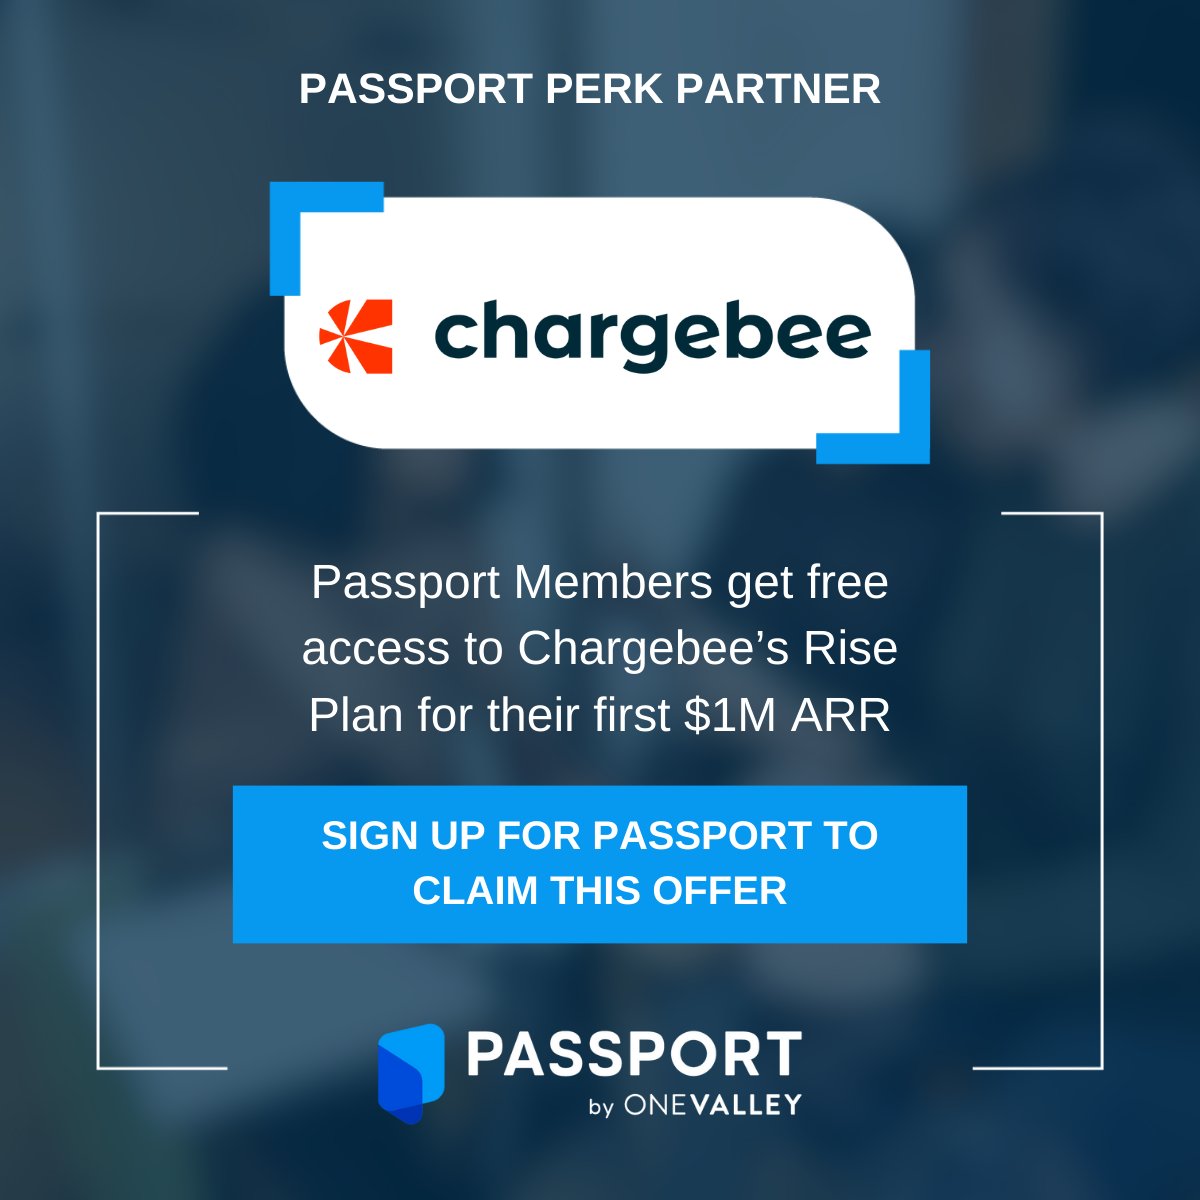 Want to streamline your startup's customer engagement? We've partnered with @chargebee to bring you exclusive discounts on their robust subscription management platform. Check out Passport's CRM perks. hubs.ly/Q02bHTQB0